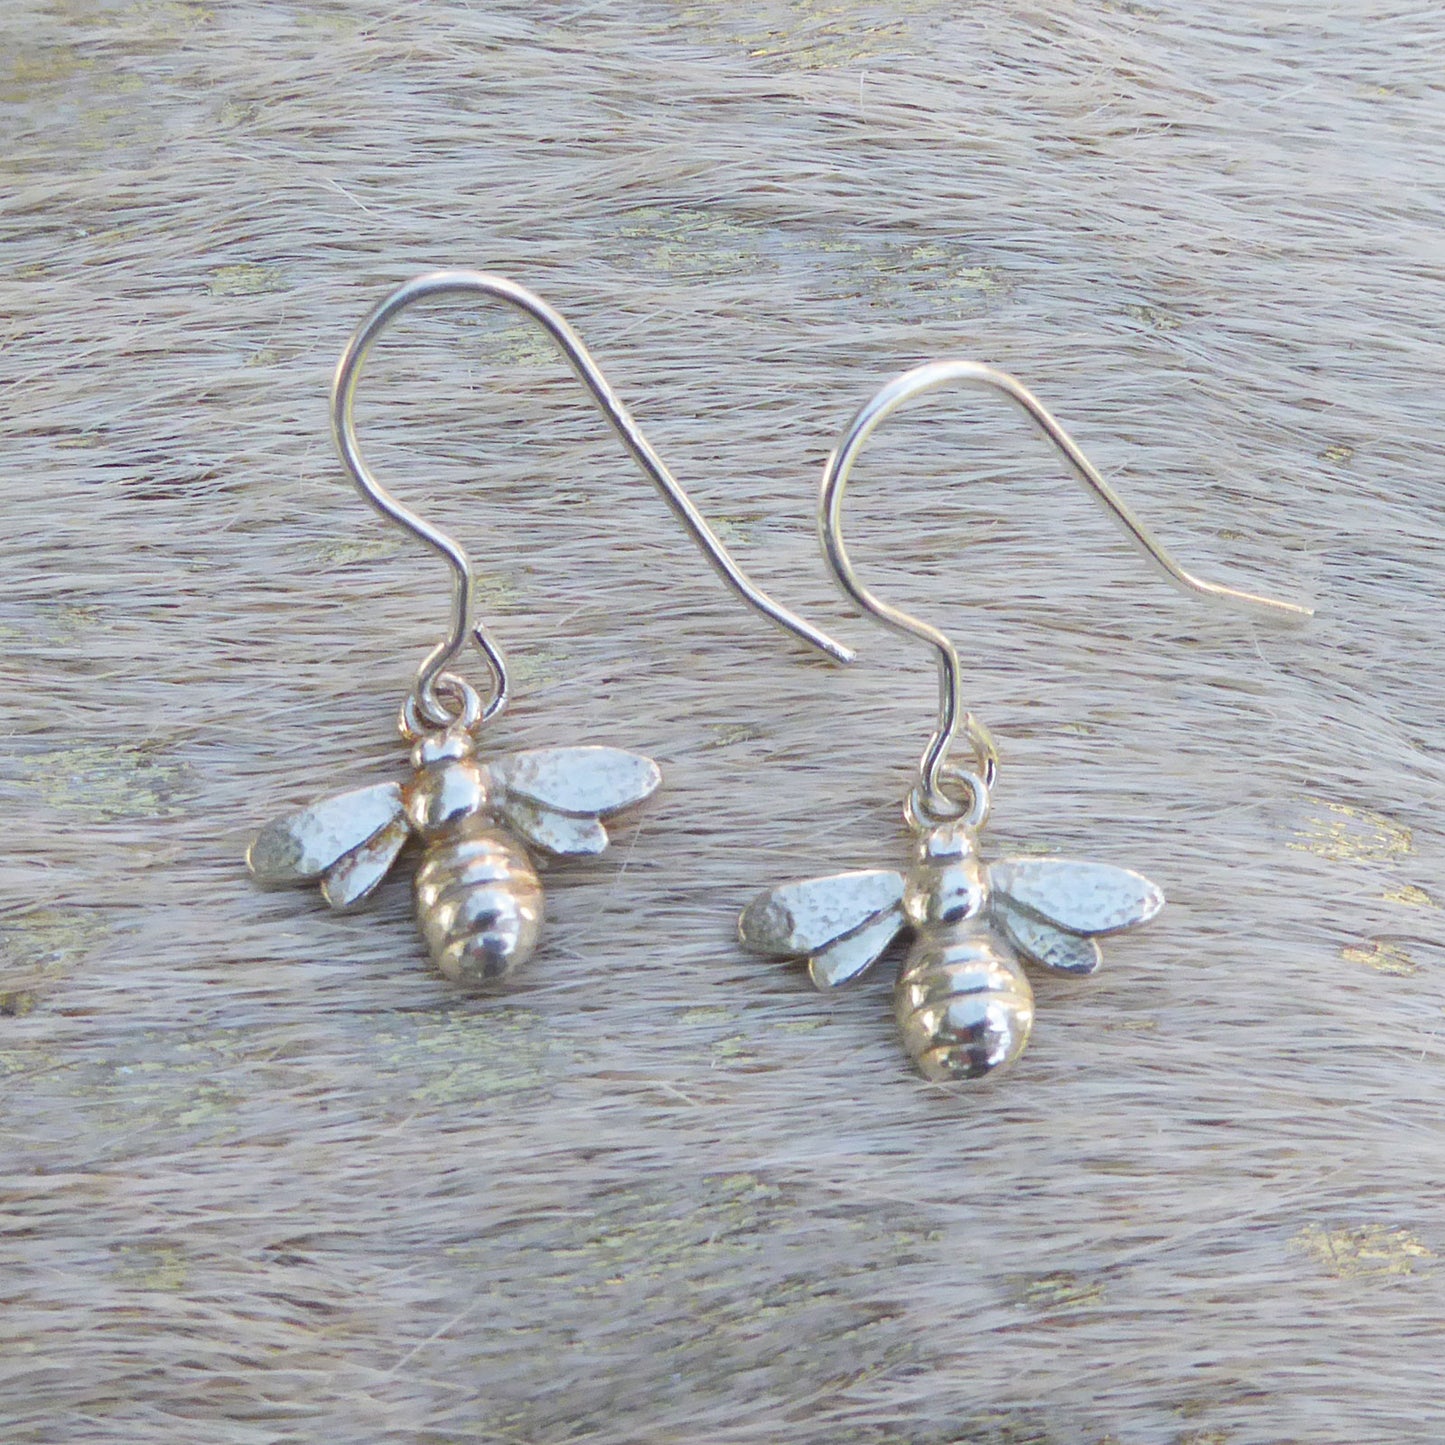 Sterling silver bees on a short ear wire